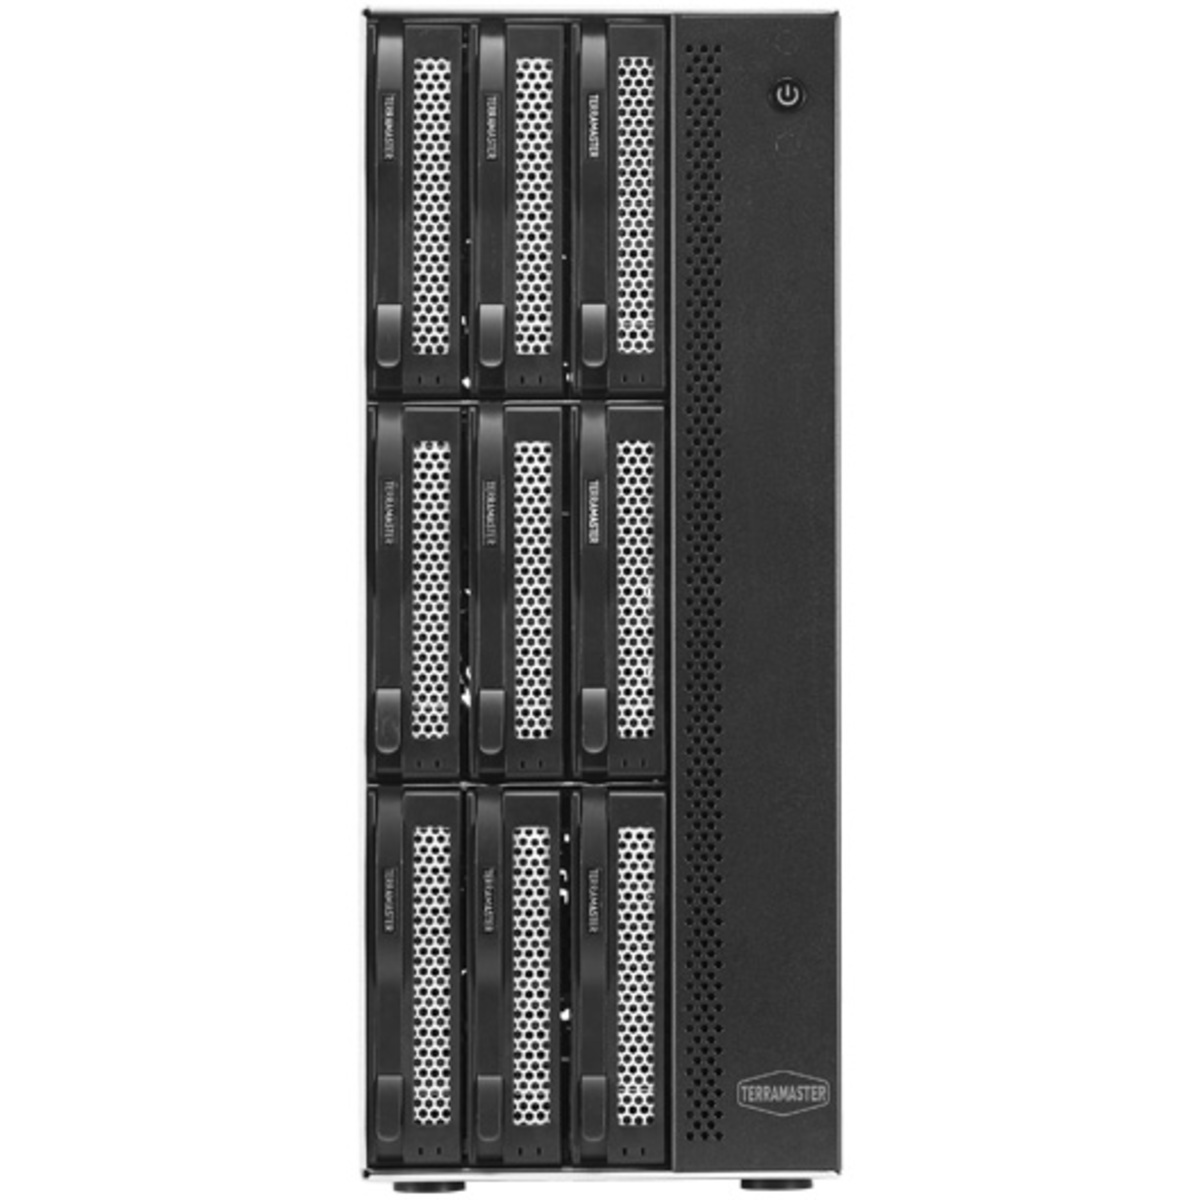 TerraMaster T9-450 176tb 9-Bay Desktop Multimedia / Power User / Business NAS - Network Attached Storage Device 8x22tb Seagate EXOS X22 ST22000NM001E 3.5 7200rpm SATA 6Gb/s HDD ENTERPRISE Class Drives Installed - Burn-In Tested T9-450